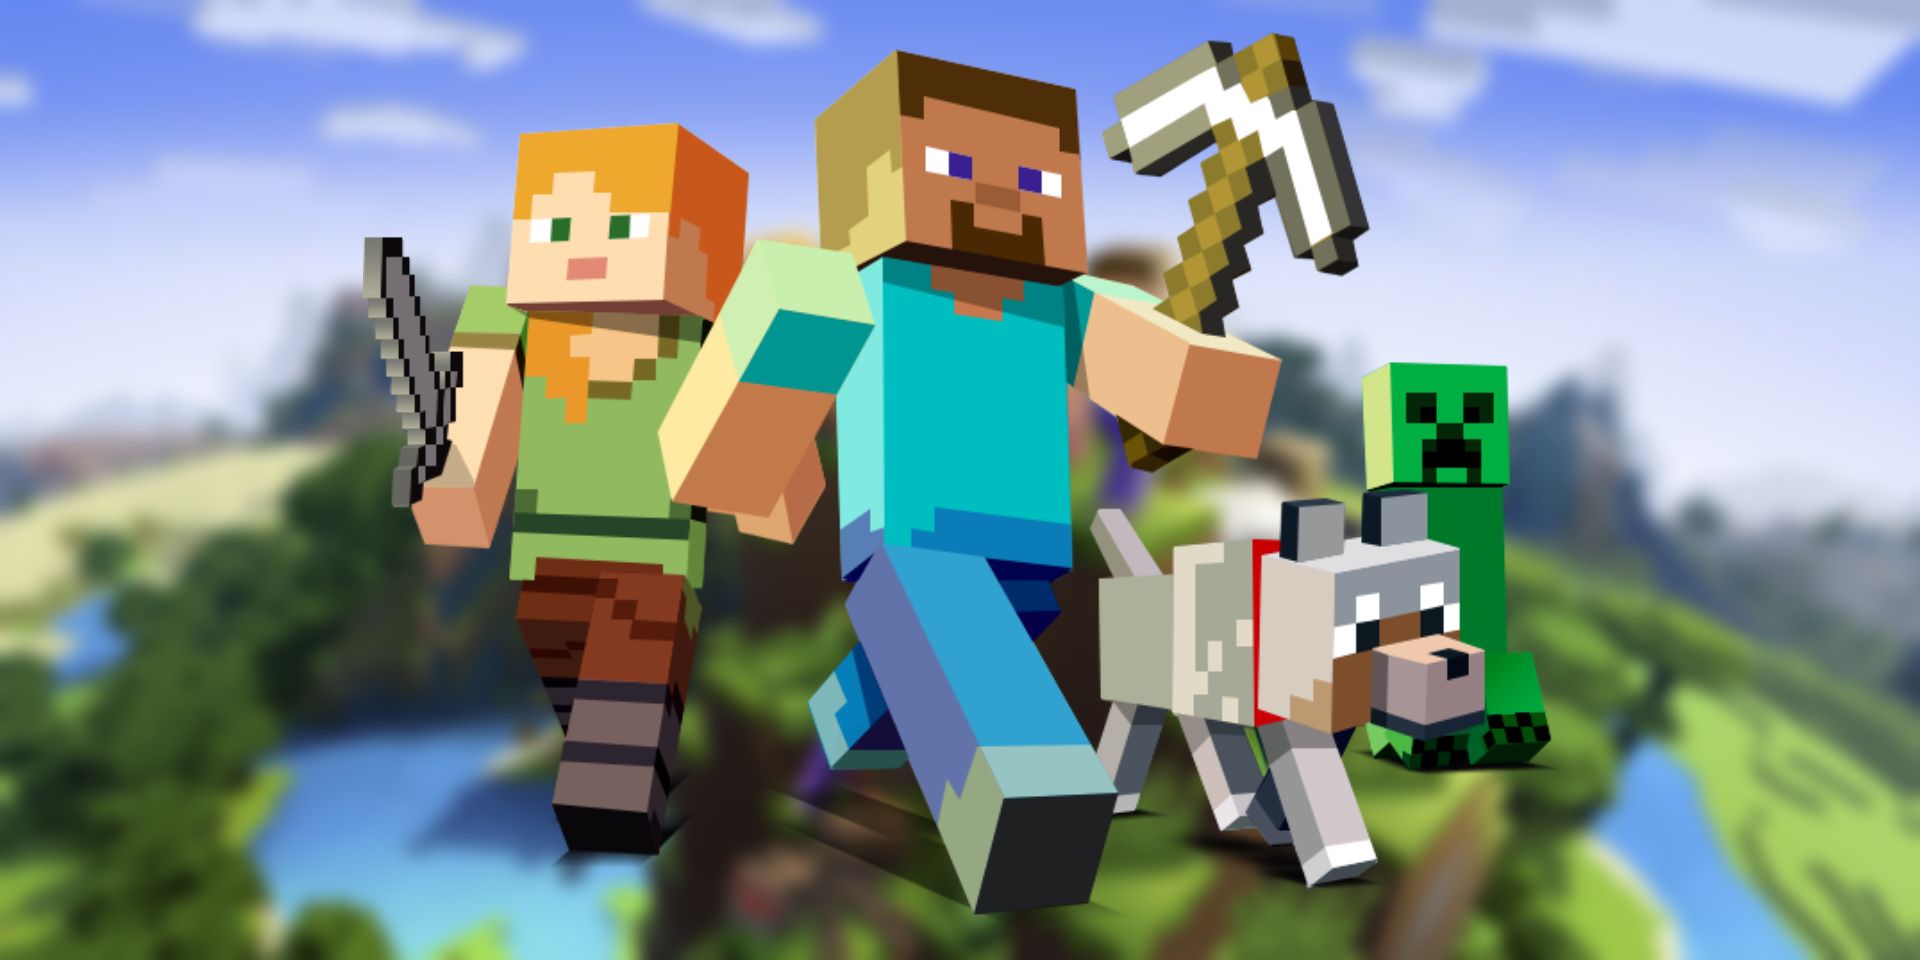 Does Minecraft Have A Story Or Plot? | Screen Rant